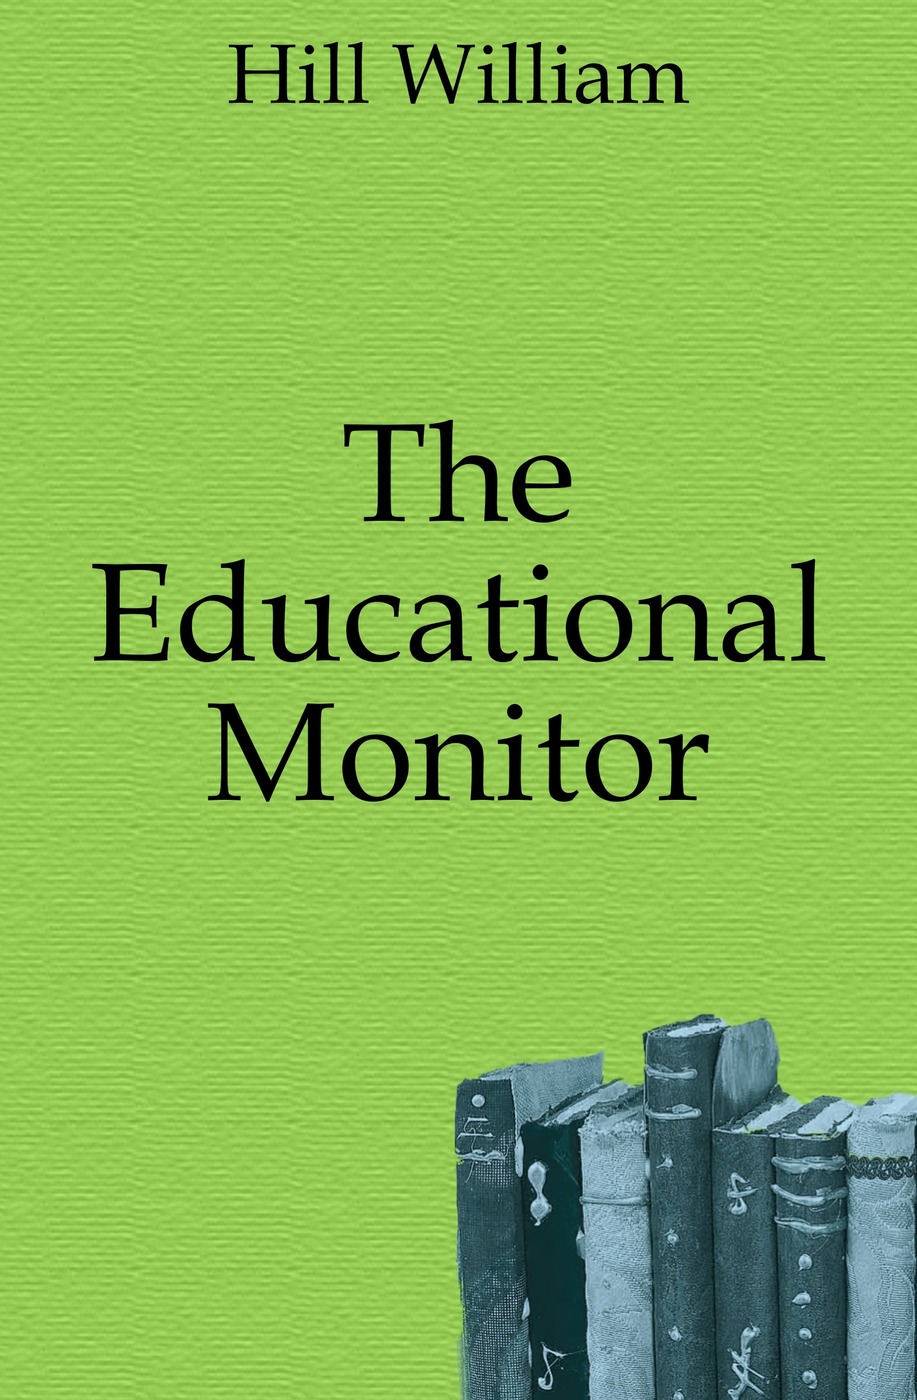 The Educational Monitor